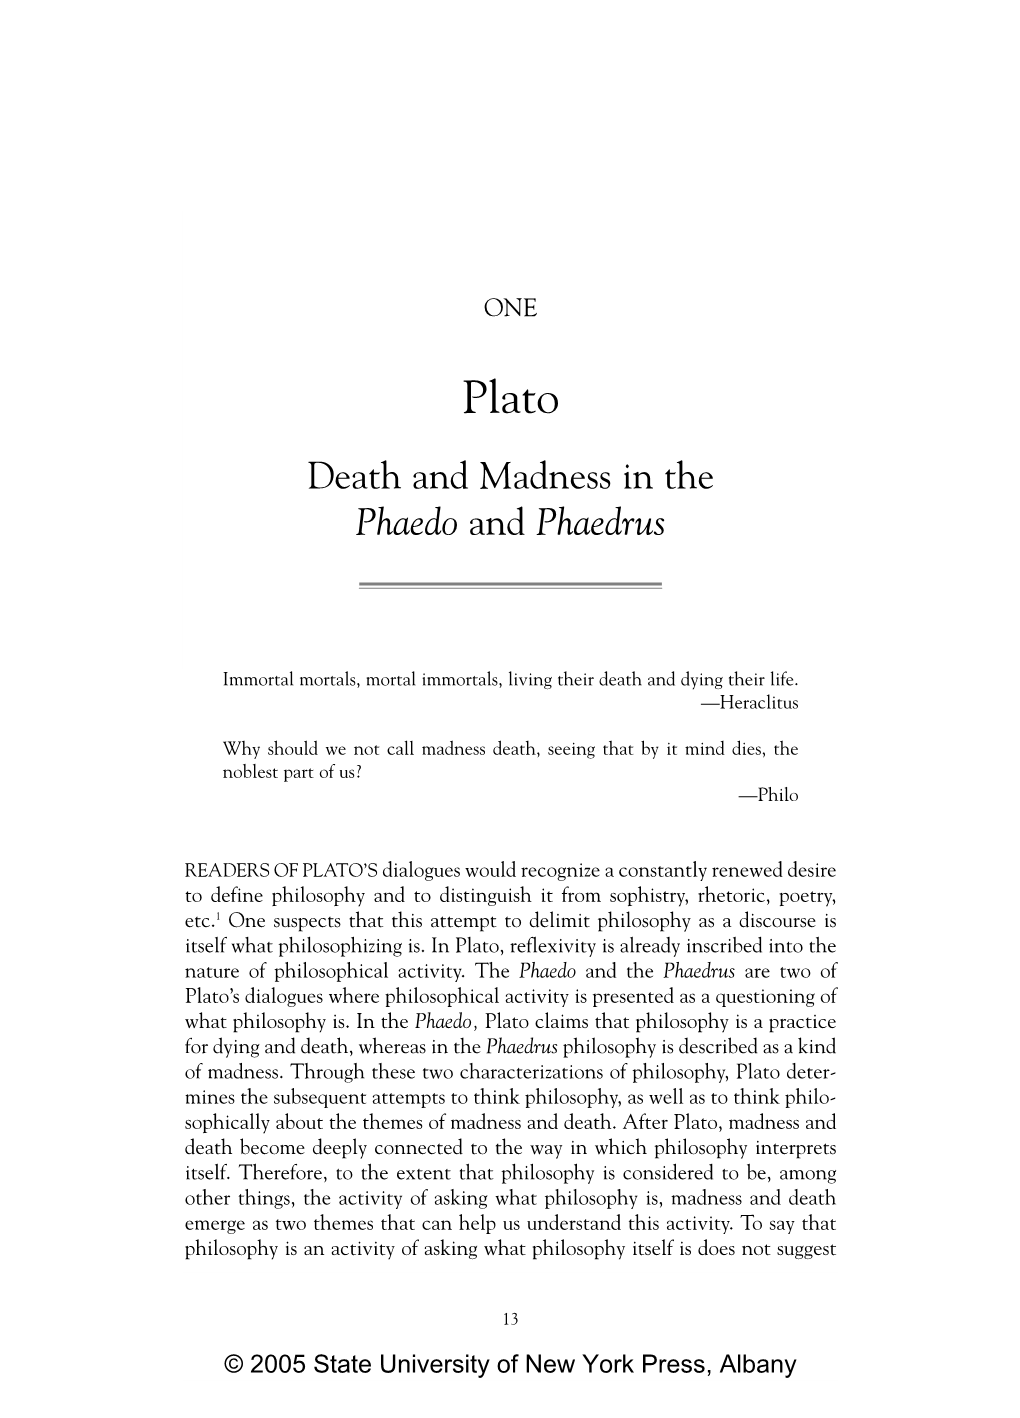 Death and Madness in the Phaedo and Phaedrus